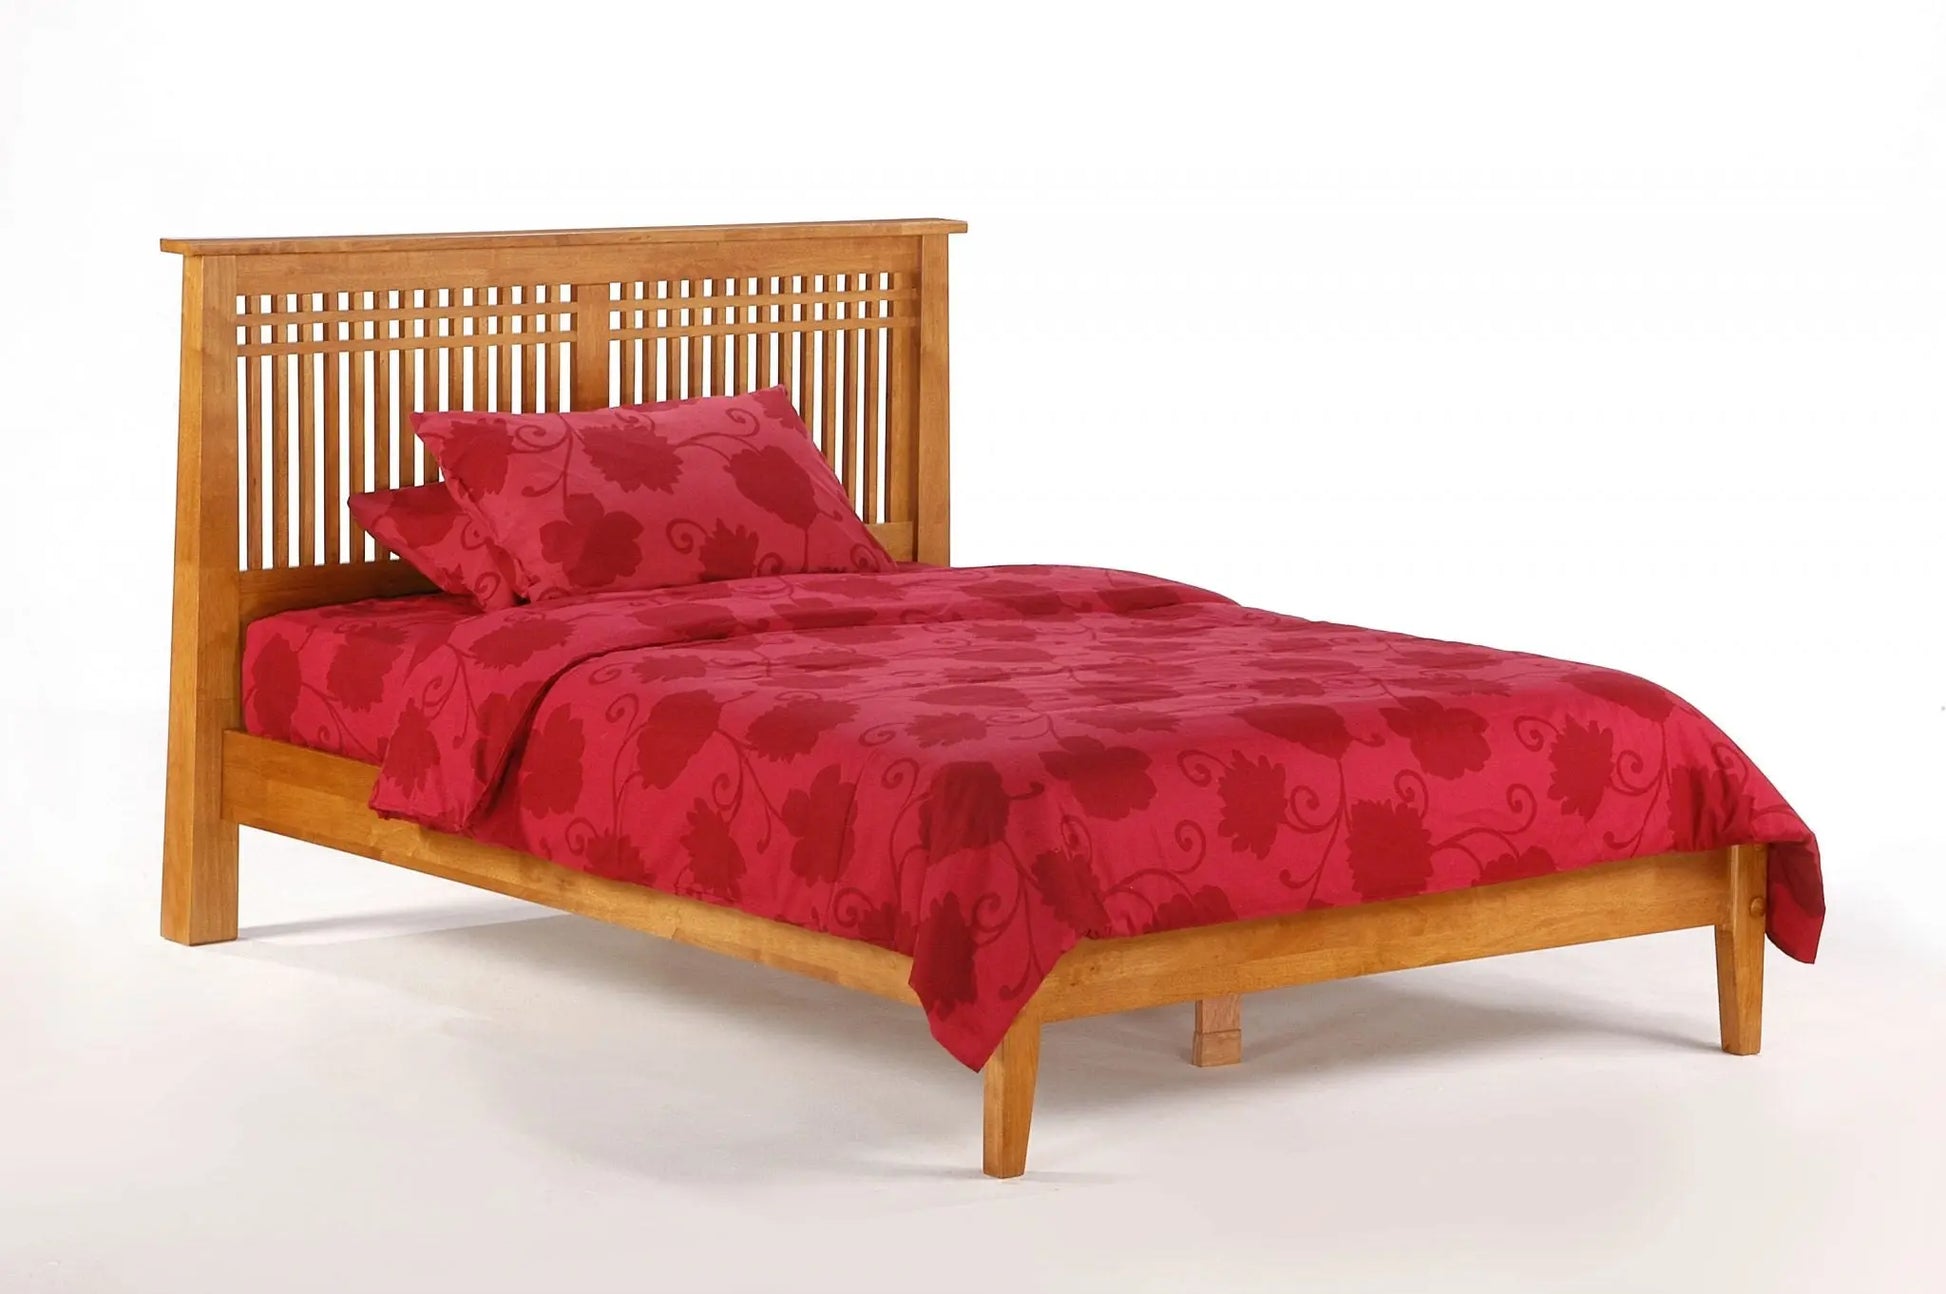 SOLSTICE BED night and day furniture